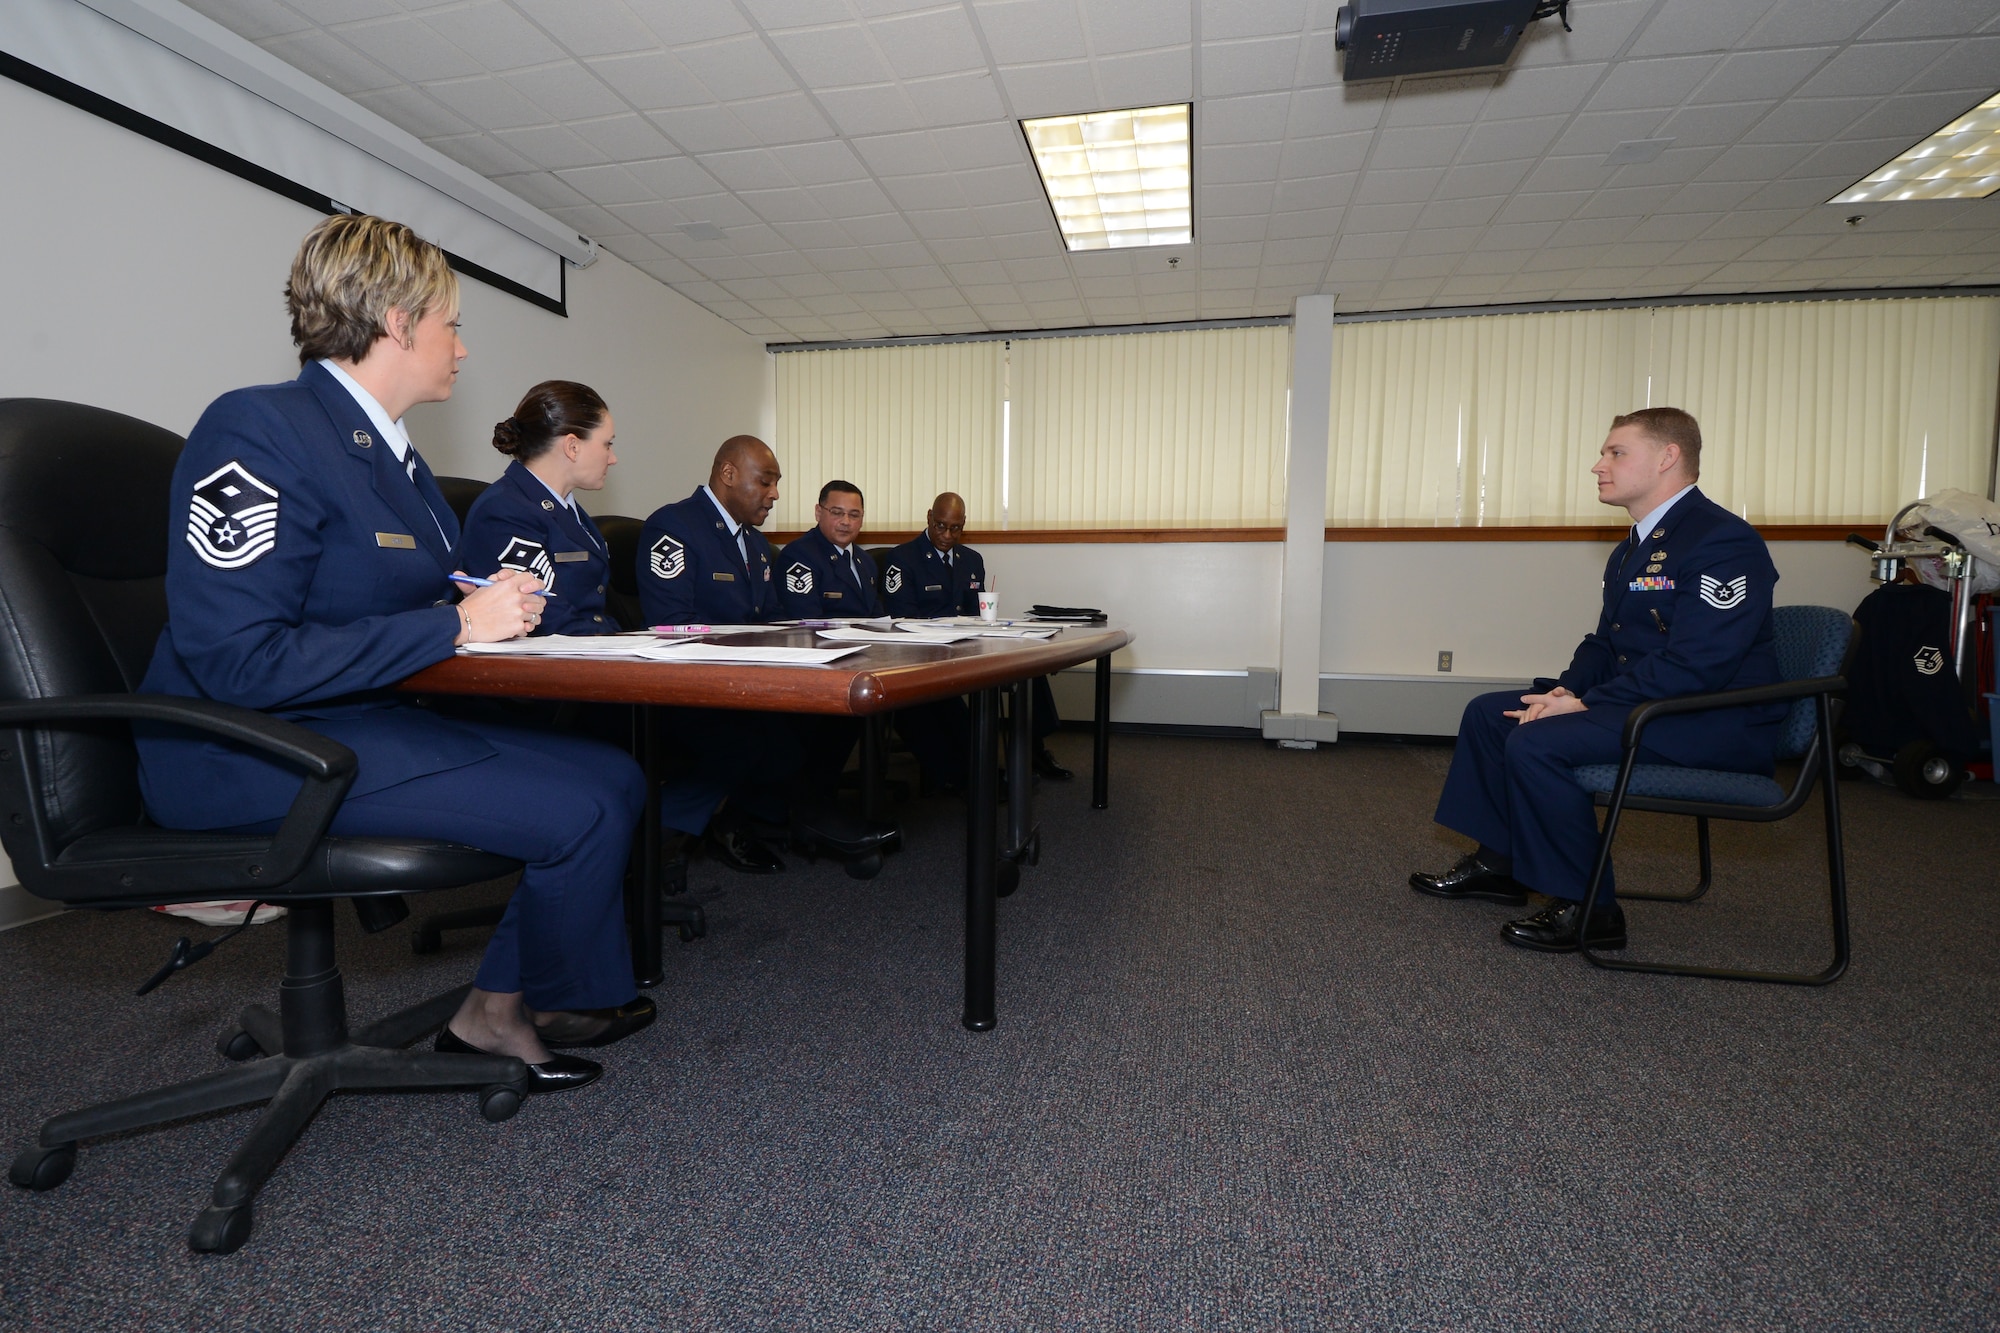 Tech Sgt. Brian Gilbert of the 103rd Maintenance Group answers questions from a board of First Sergeants during the annual Diamond Award selection process on January 1, 2014, at Bradley Air National Guard Base, East Granby, CT.  Once a year, the Connecticut Air National Guard’s first sergeants present the Diamond Award to an individual who has shown a great deal of potential for future leadership, had a positive impact on his or her unit, and represents what the Air Force’s core values.  (U.S. Air National Guard photo by Senior Airman Emmanuel Santiago) 